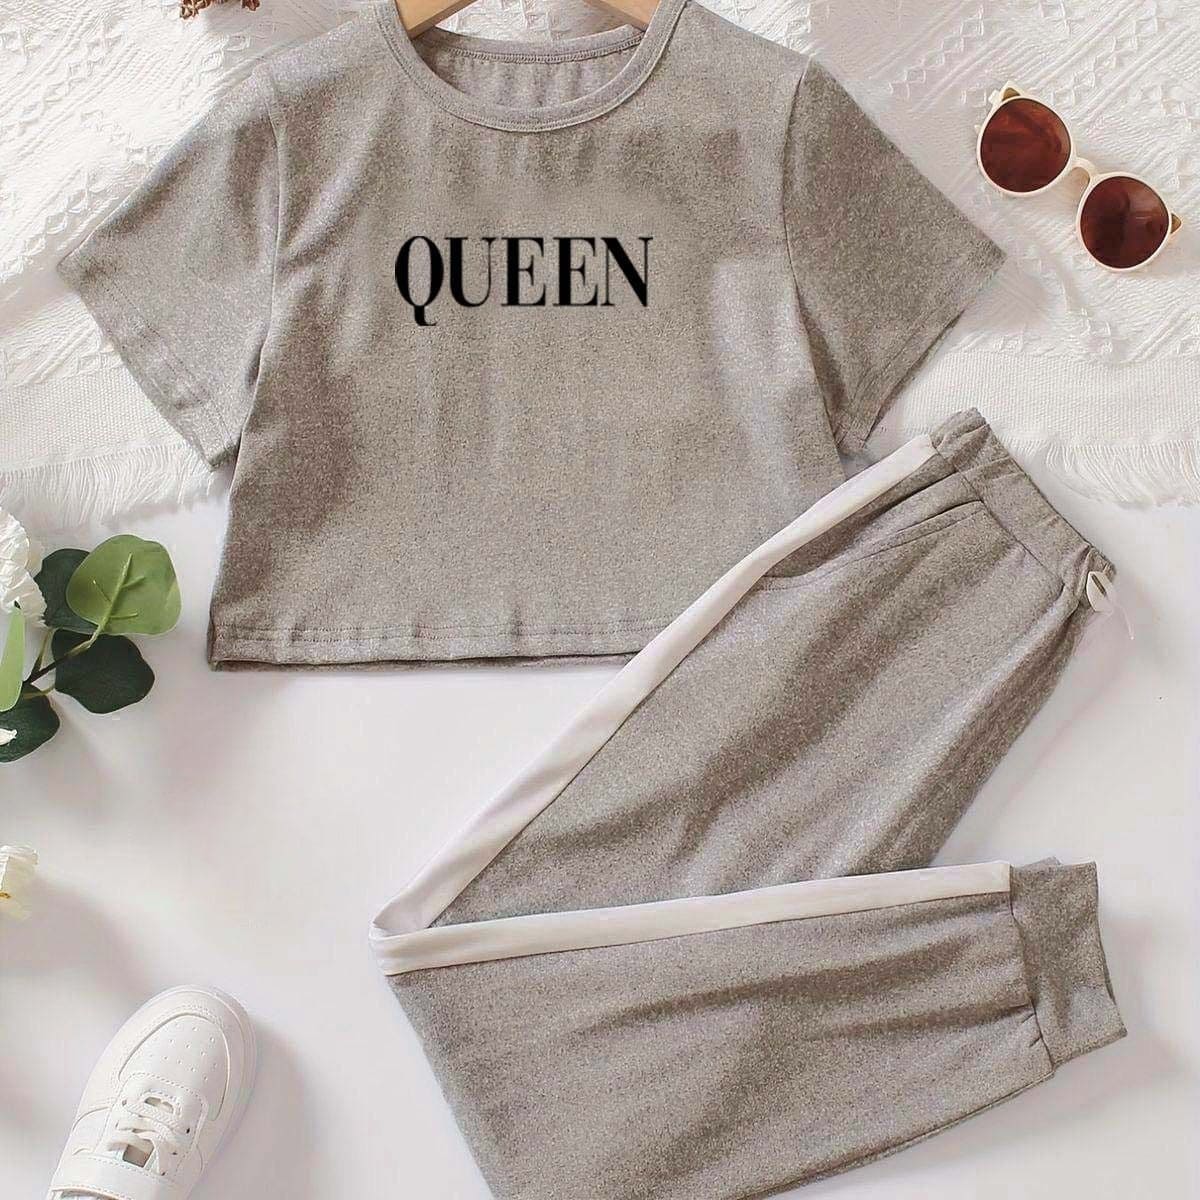 Queen Crop Top Printed Track Suit, Women's Soft Sports, Comfortable Pant Sportive Track Suit